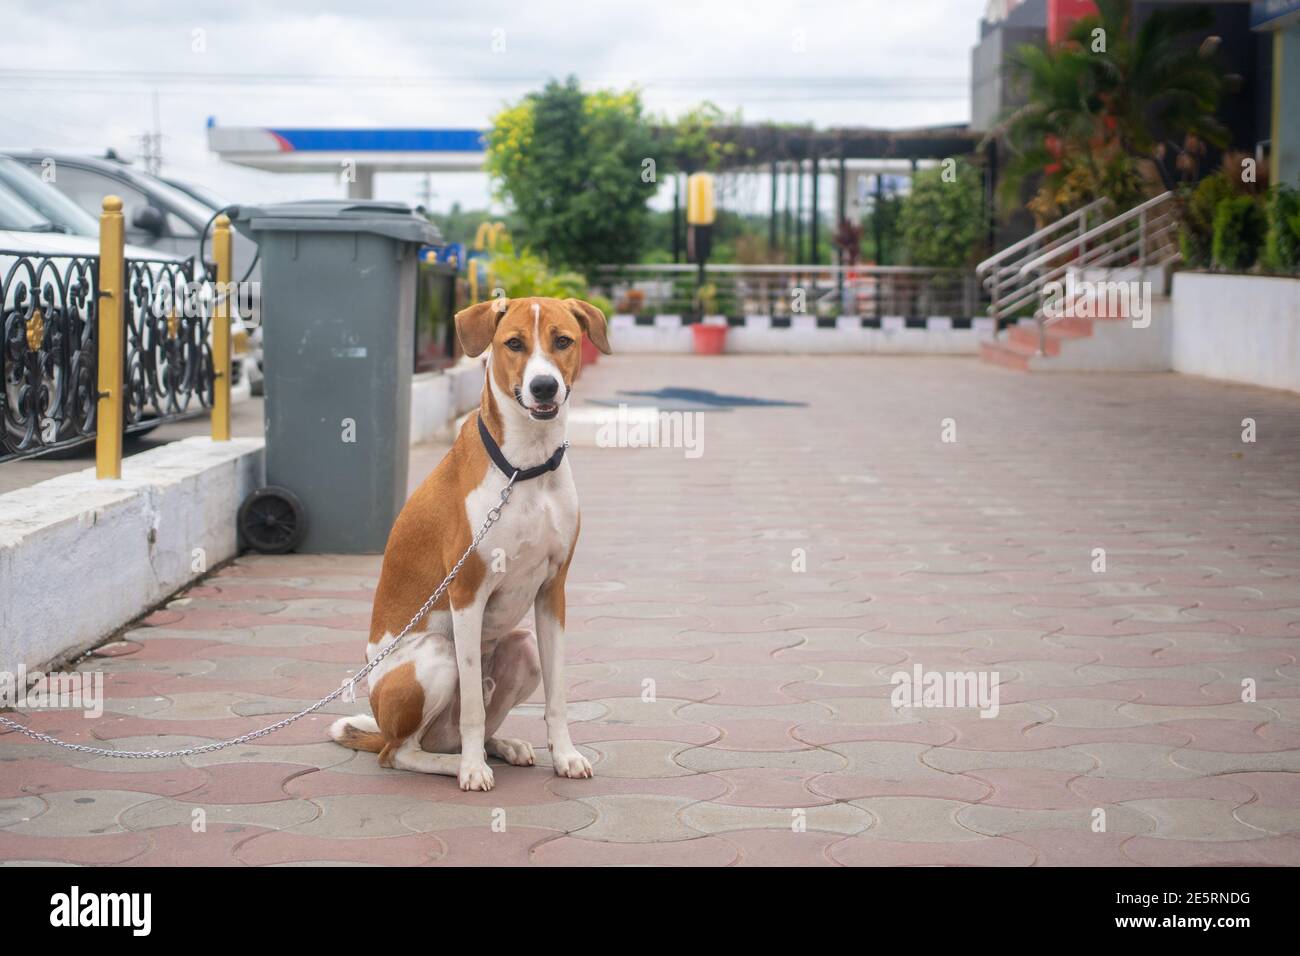 A dog on a leash waiting at a gas station in India. Stock Photo